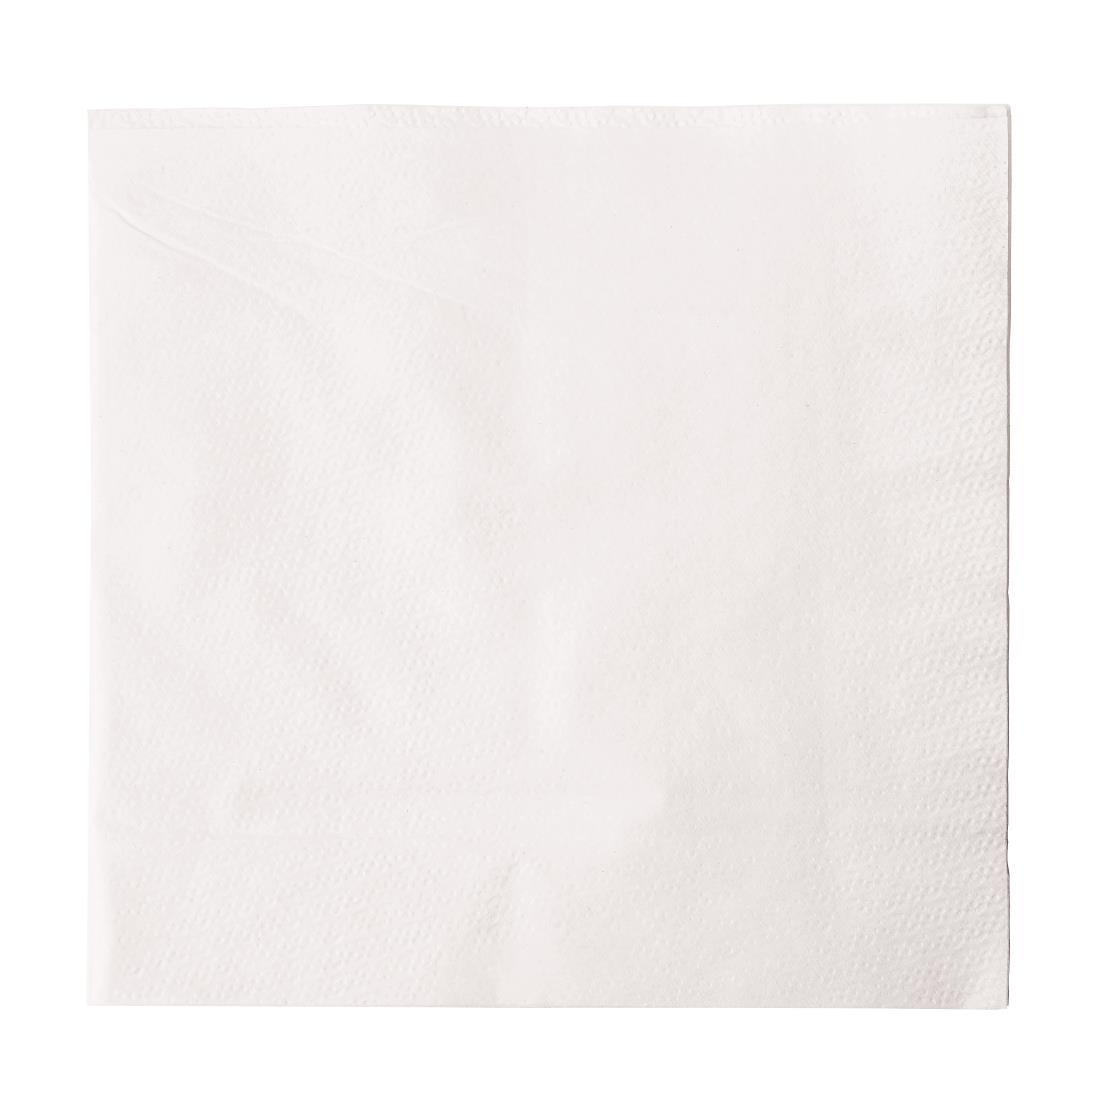 Lunch Napkin White 33x33cm 1ply 1/4 Fold (Pack of 5000) - GG996  - 1